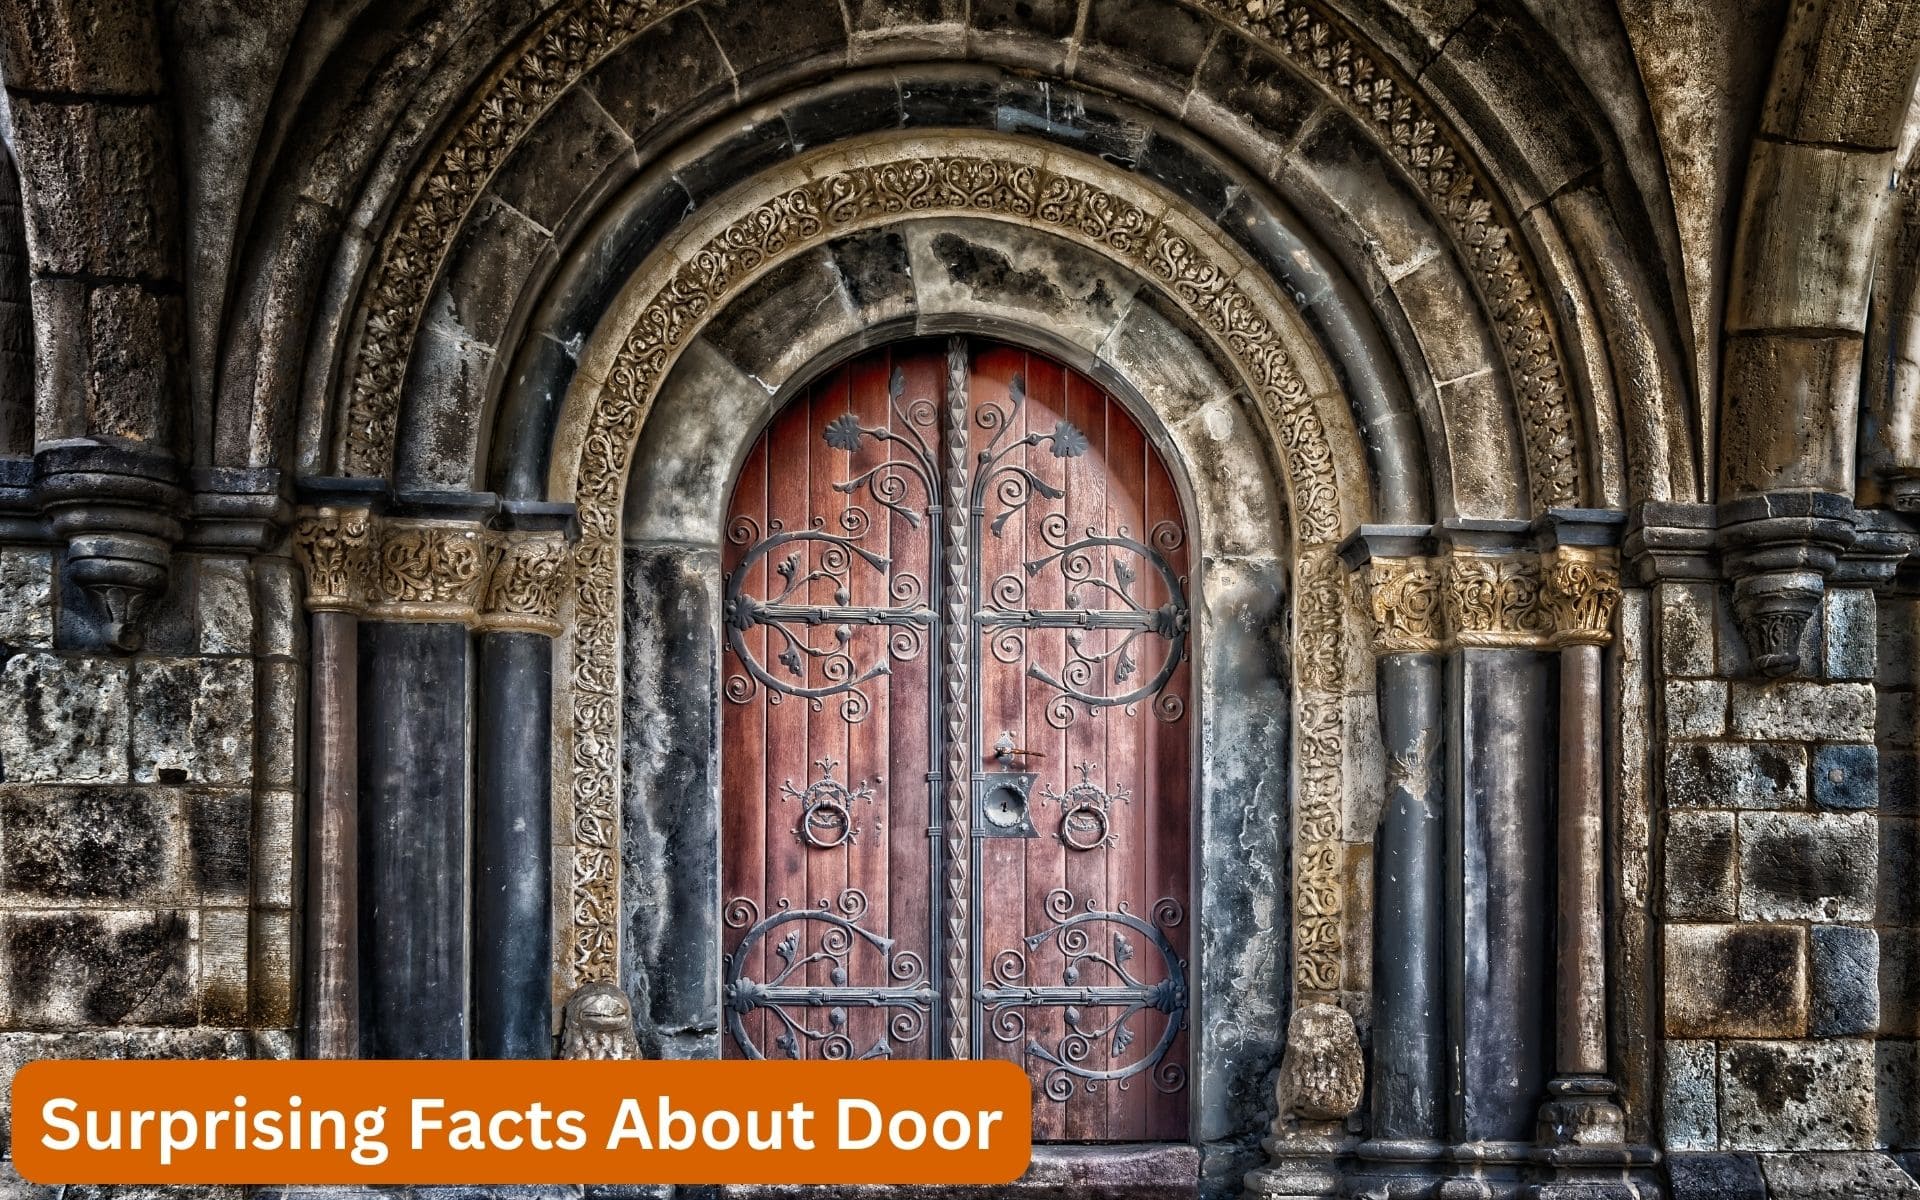 Facts about door